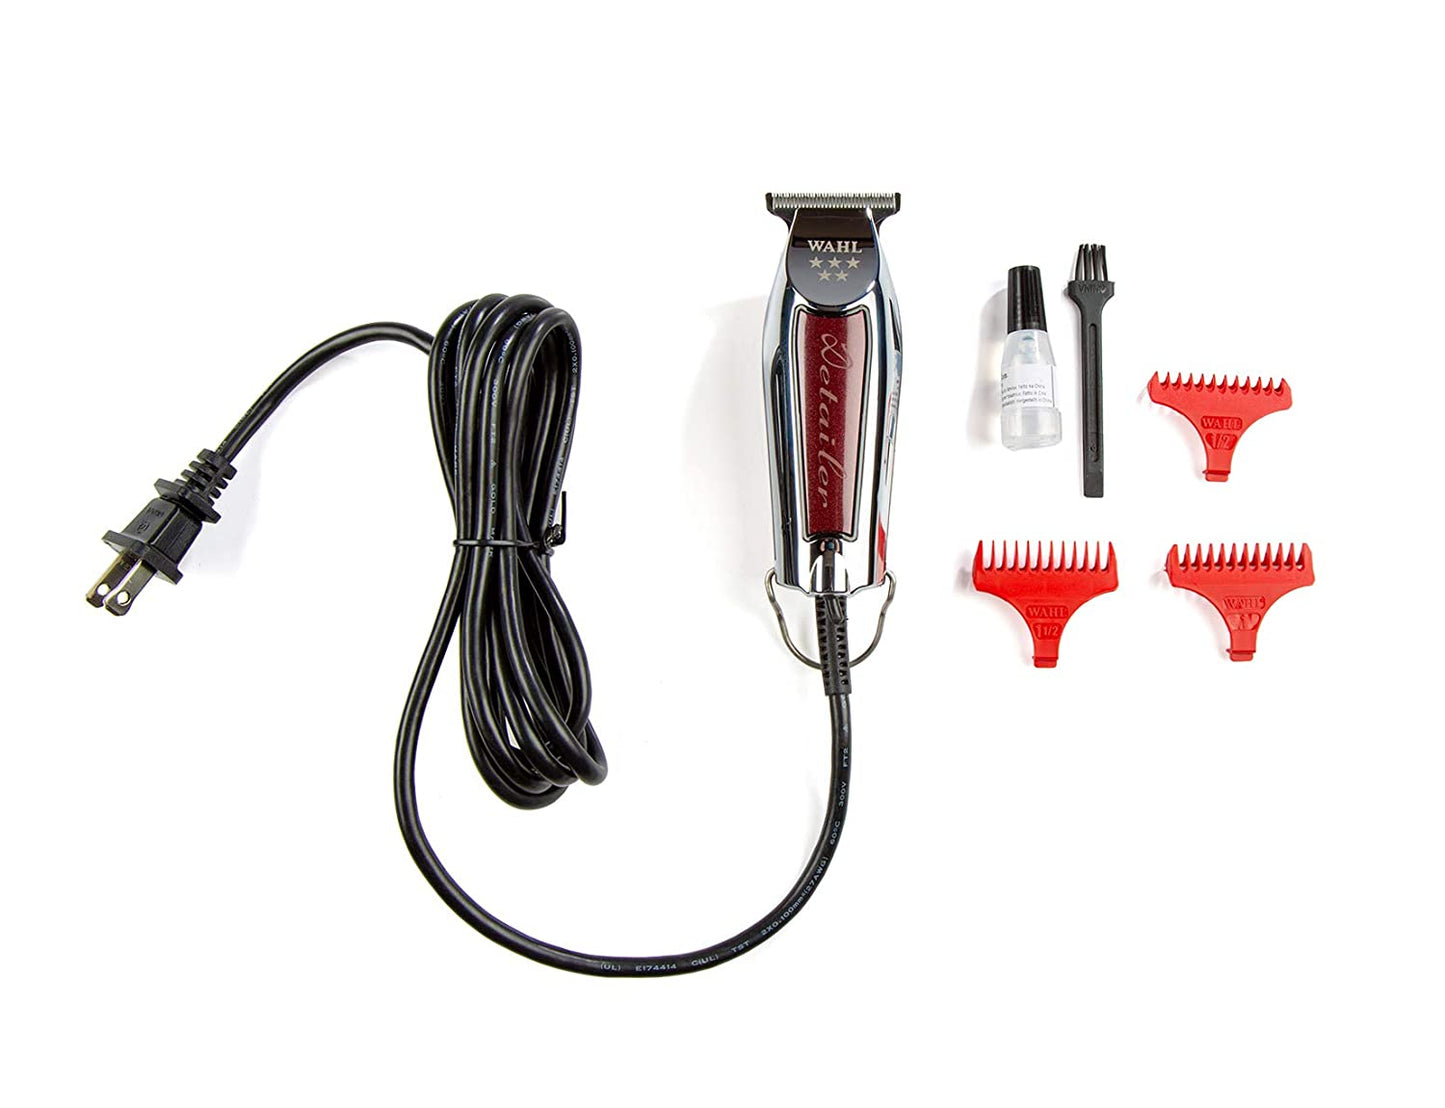 WAHL Professional Corded Detailer - Silver/Red